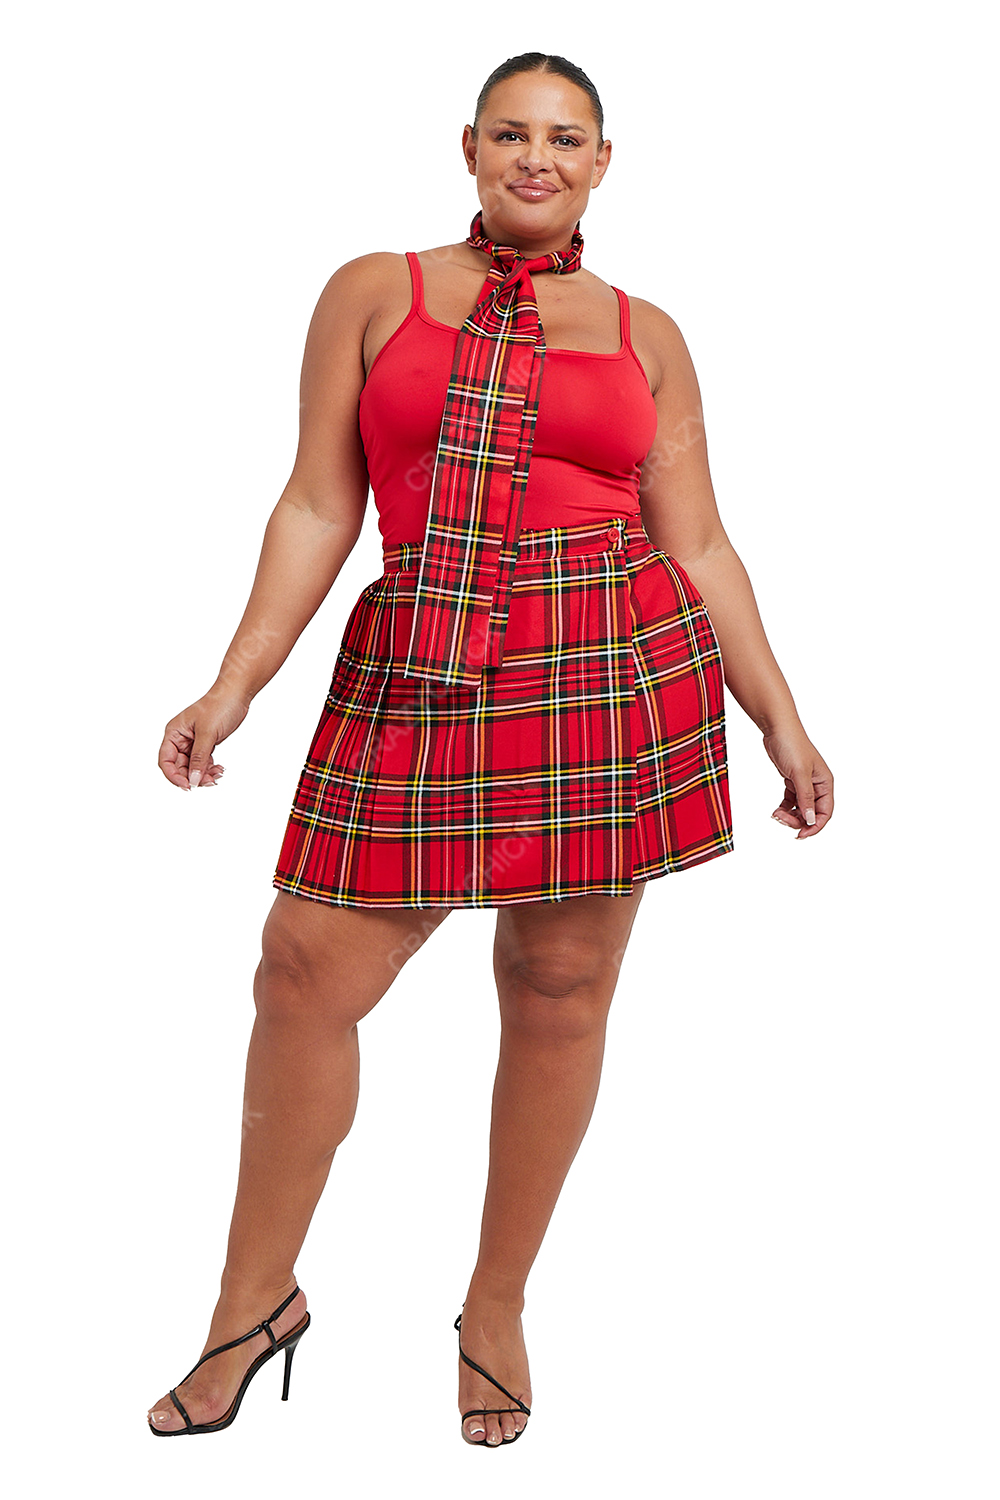 Crazy Chick Adult Plus Size  Red Wrap Over Tartan Skirt (18 Inches)